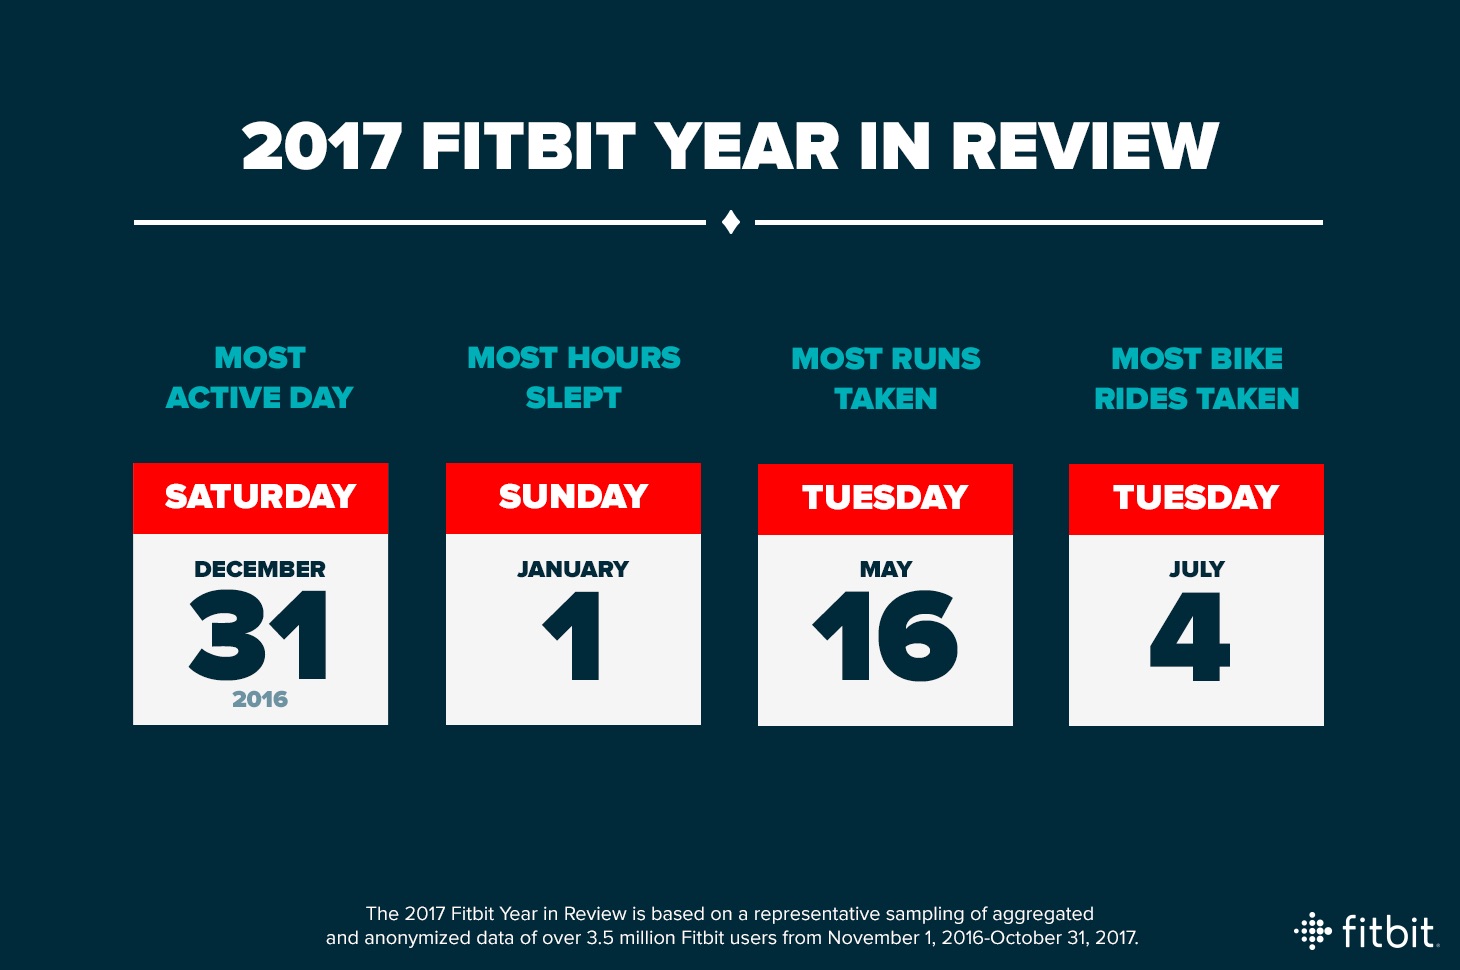 Fitbit’s Healthiest Cities, Countries, and Days for 2017